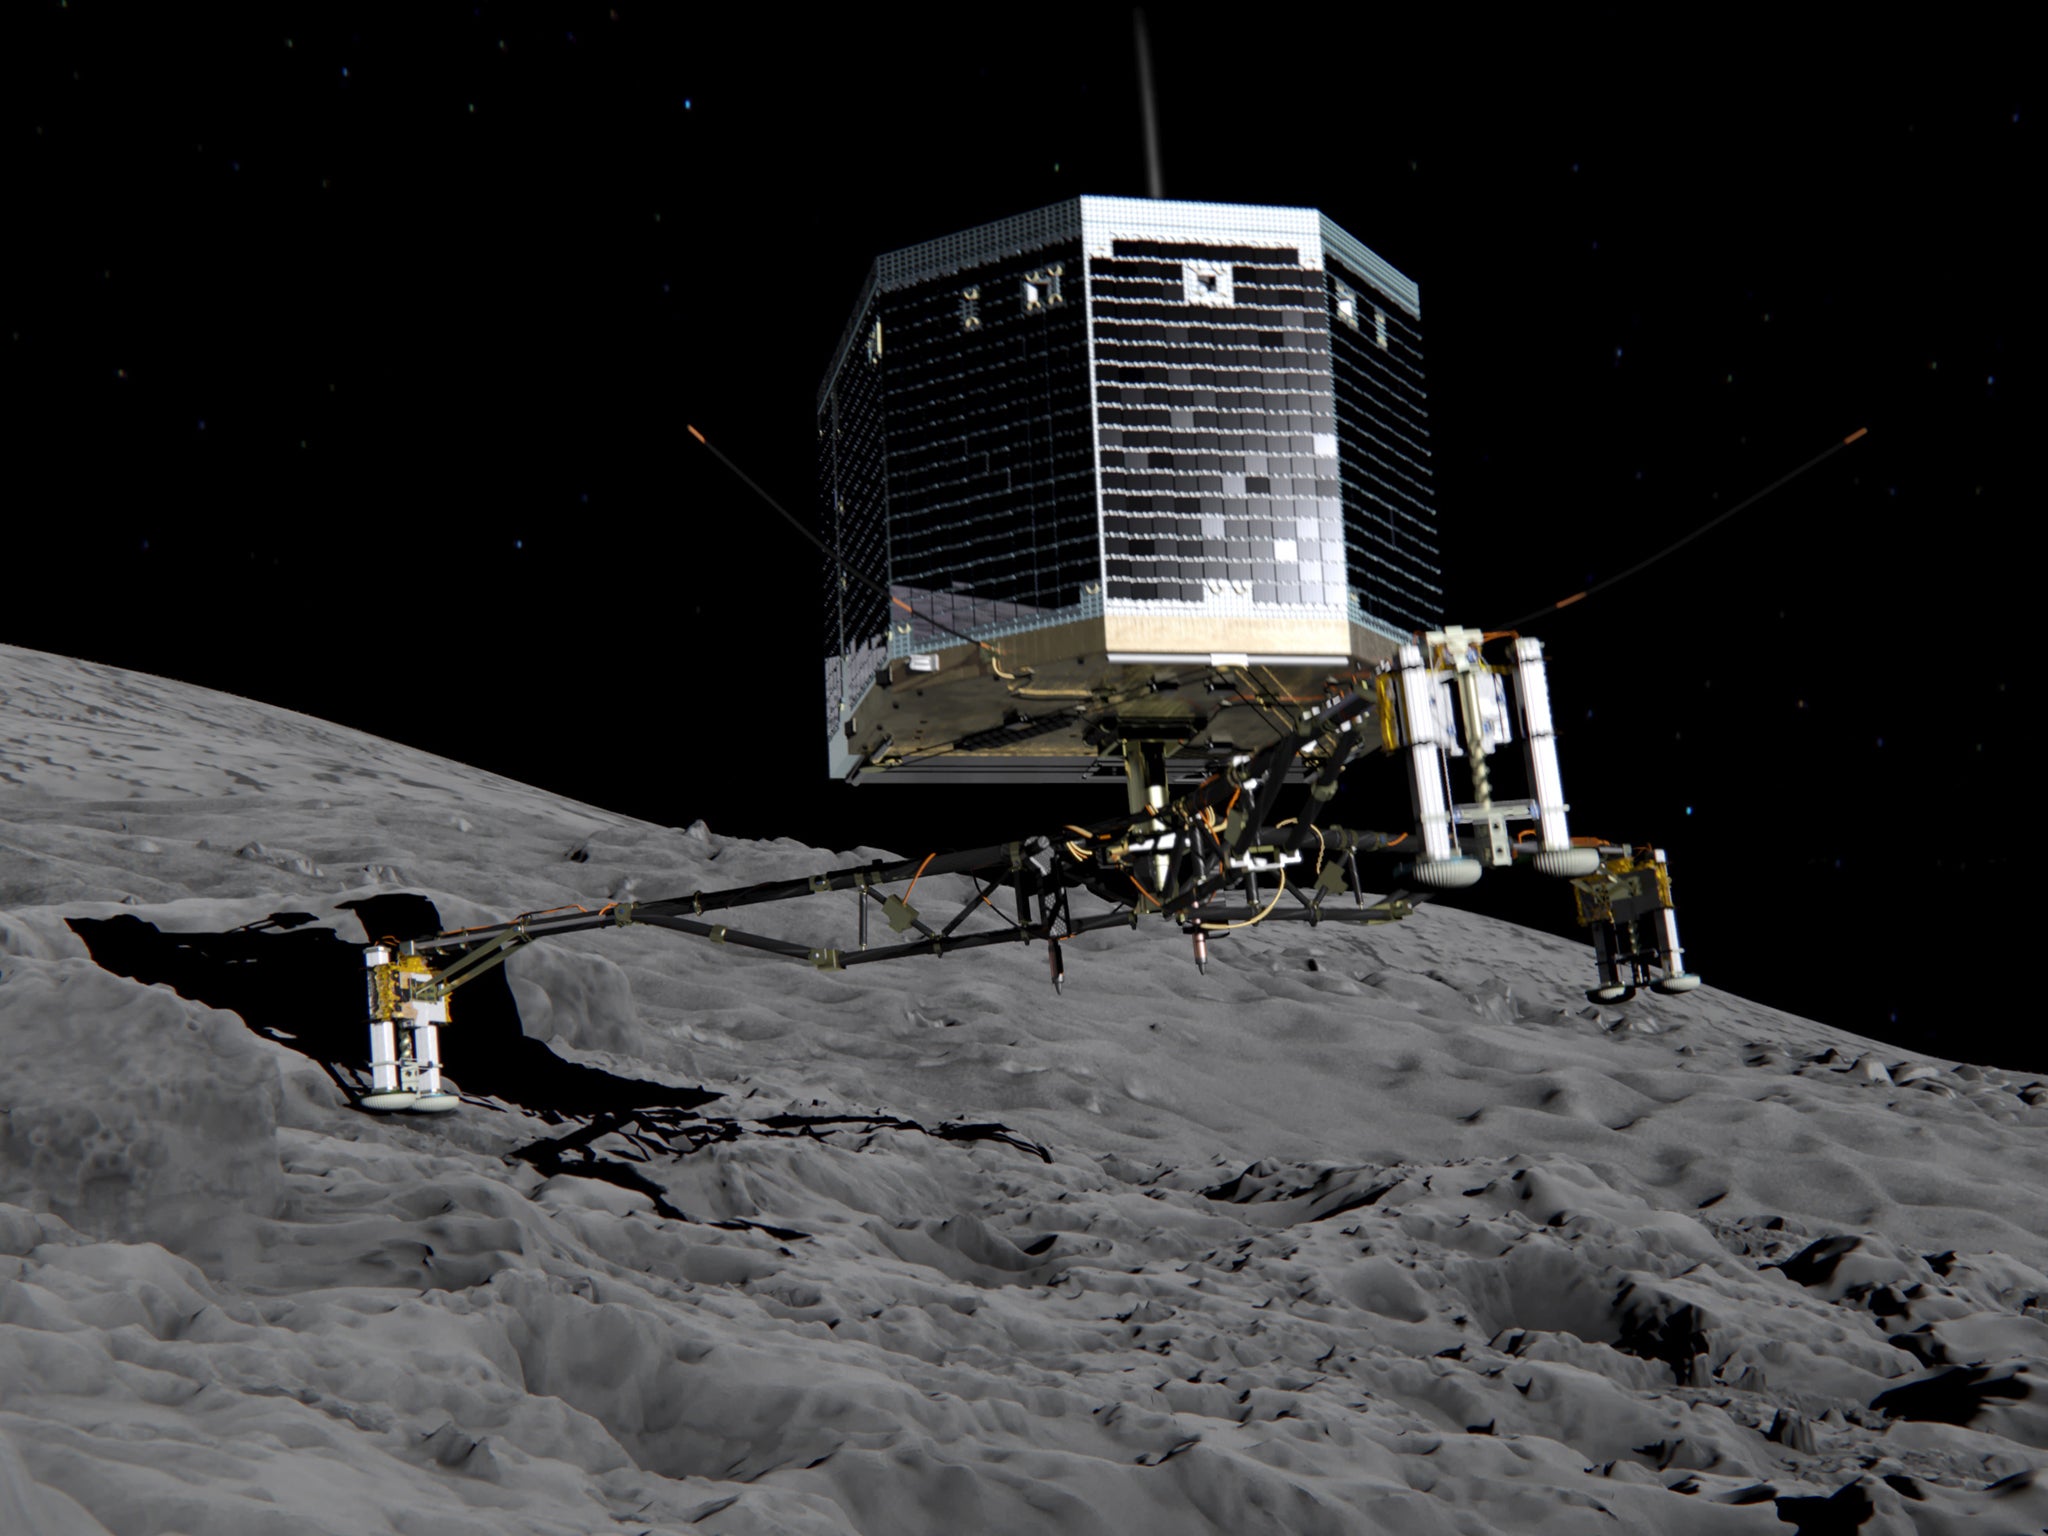 In this February 17, 2014 handout photo illustration provided by the European Space Agency (ESA) the Philae lander is pictured descending onto the 67P/Churyumov-Gerasimenko comet